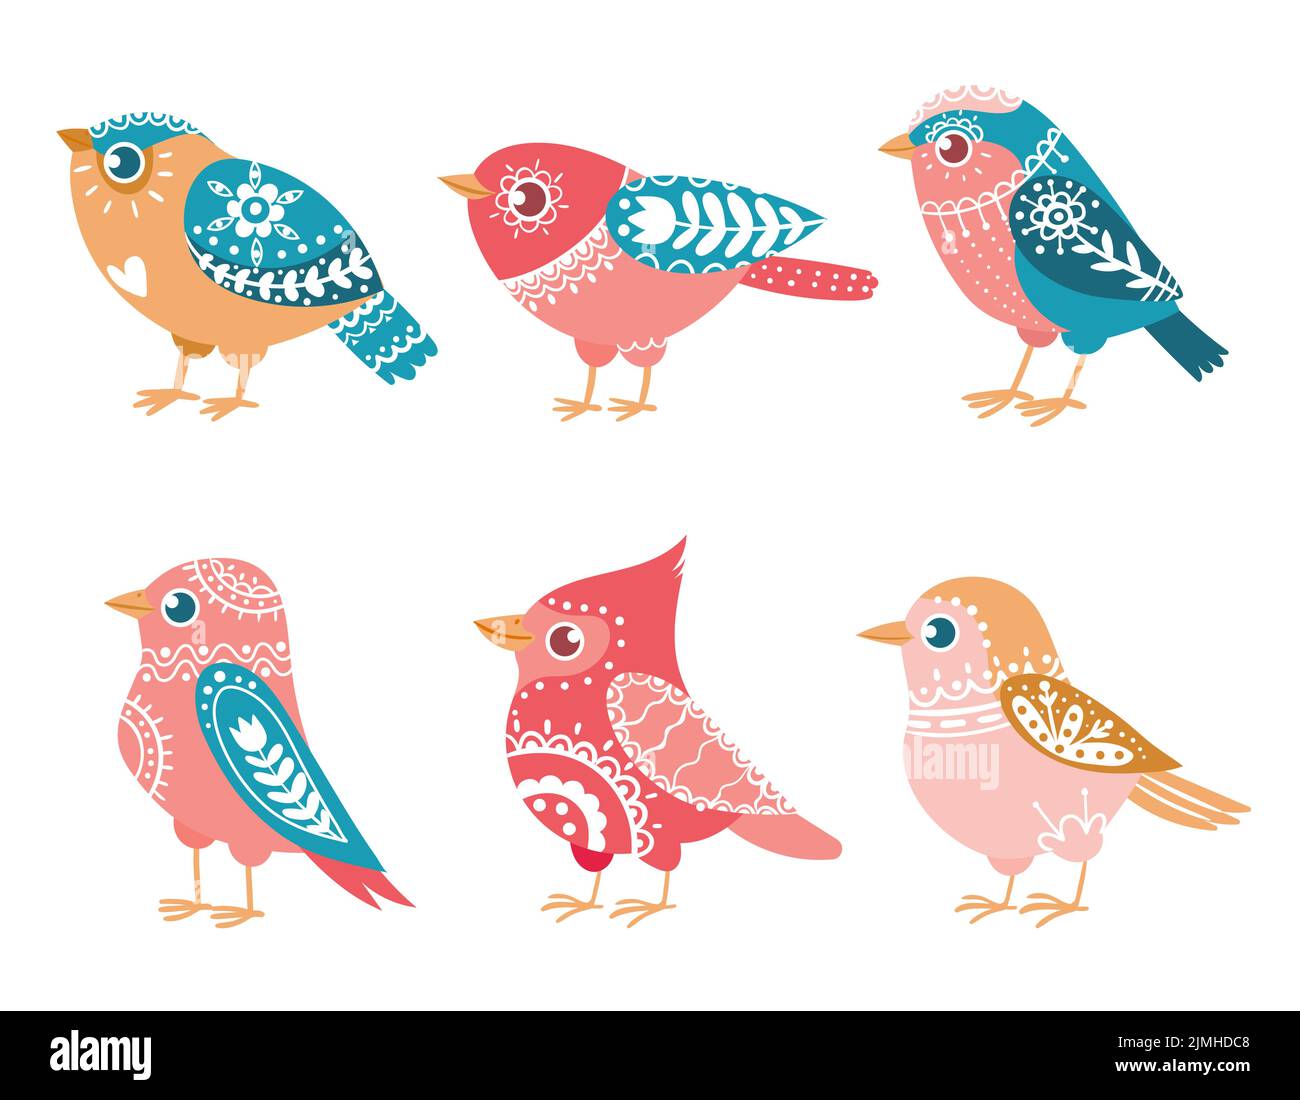 Decorative birds. Cute colorful animals with beautiful ethnic ornament. Bright feathered characters with trendy folk elements decoration in Scandinavi Stock Vector